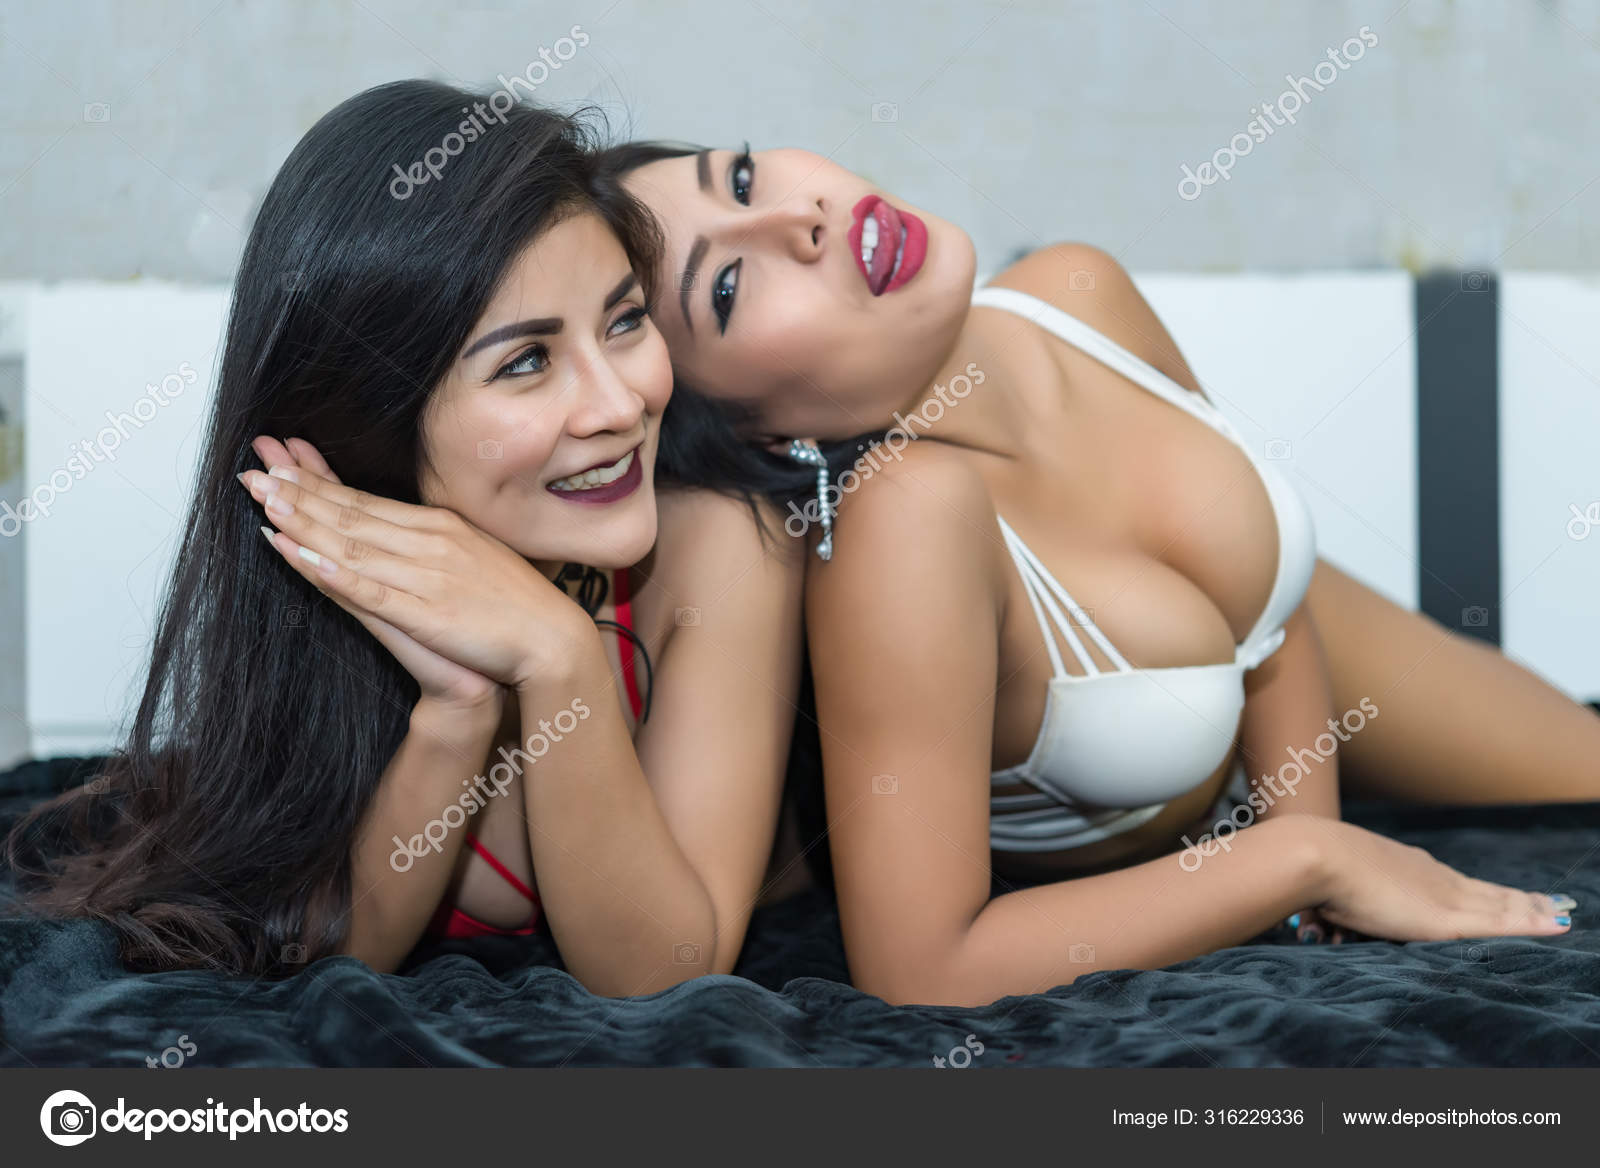 Portrait Sexy Asian Women Lying Bed Fashion Portrait Young Elegant Stock Photo by ©reewungjunerr 316229336 image